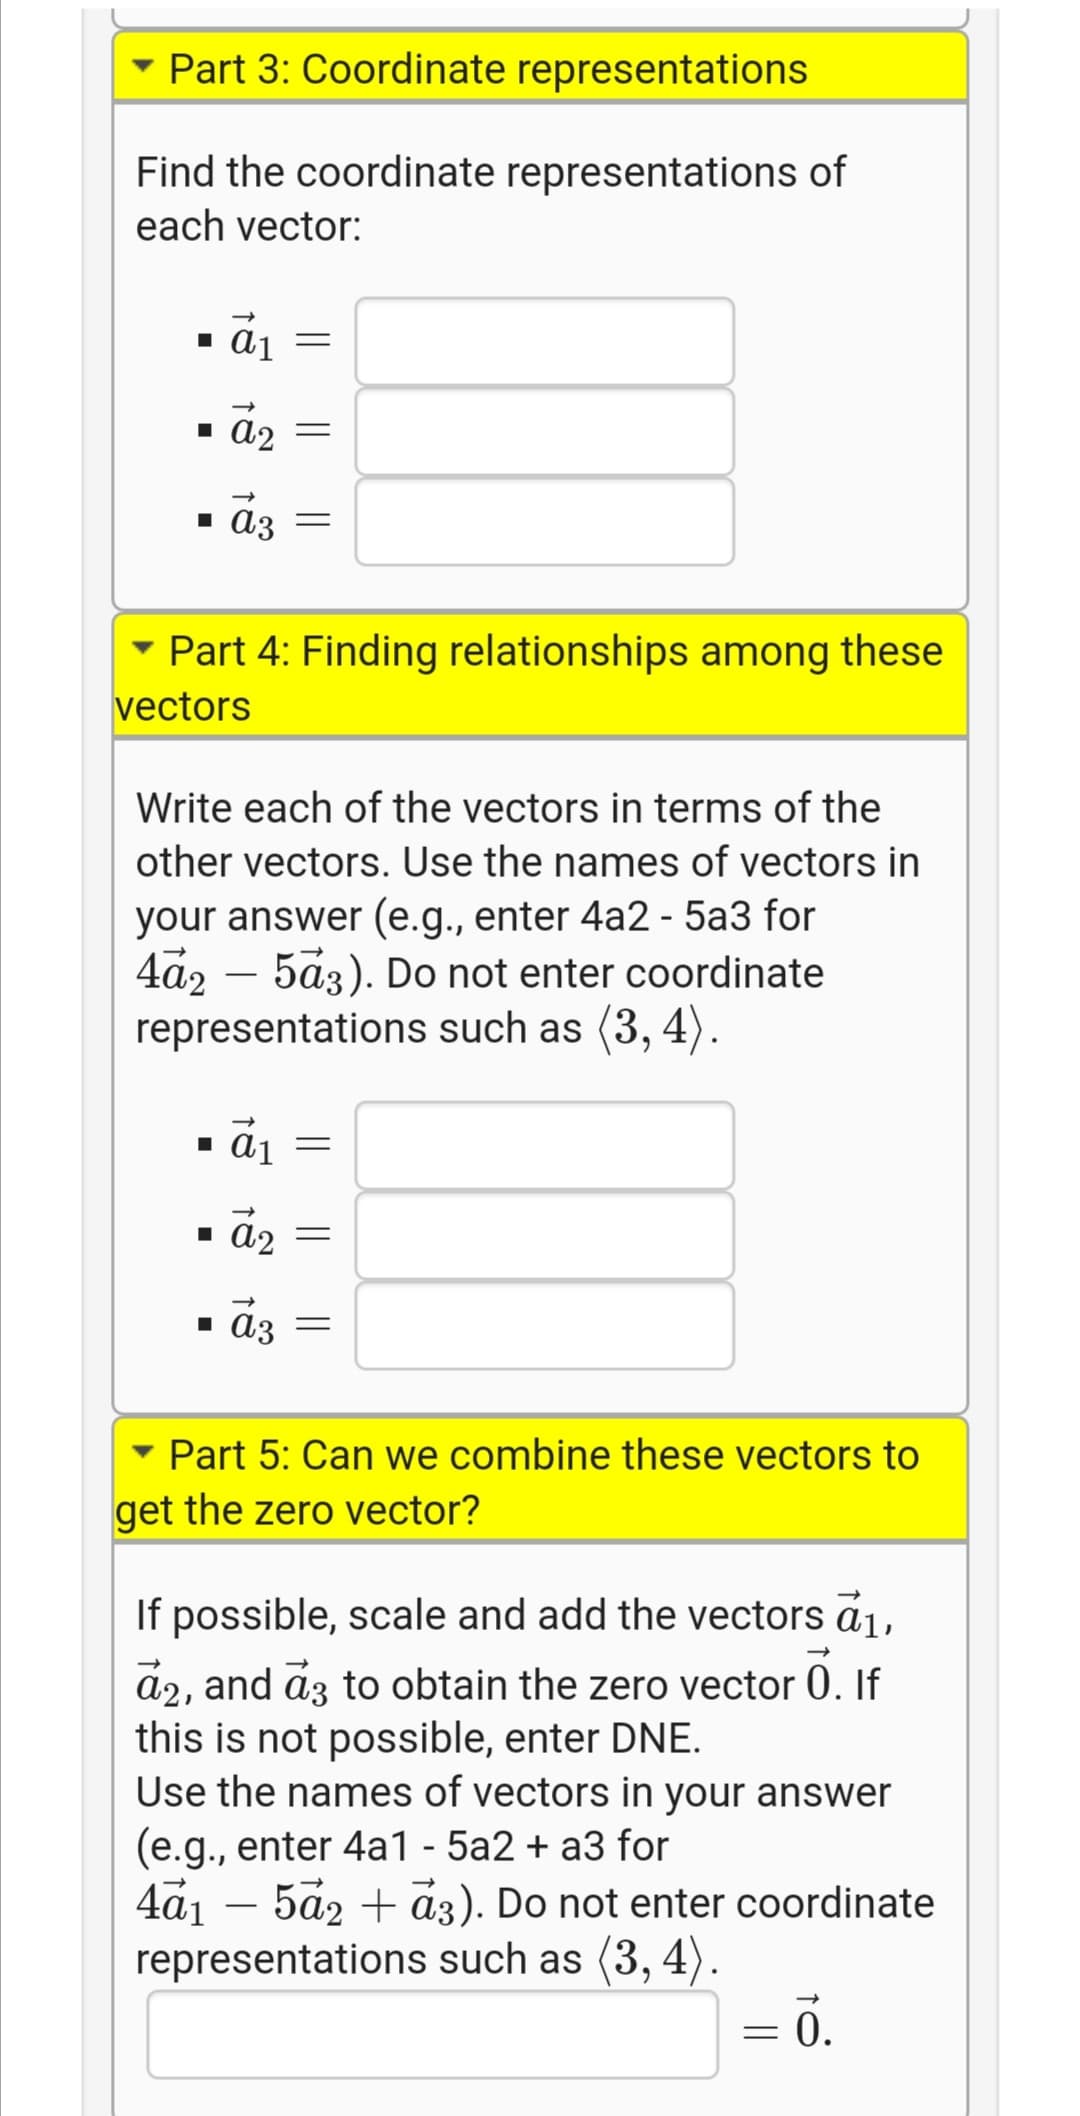 Part 3: Coordinate representations
Find the coordinate representations of
each vector:
1 A2 =
• a3
- Part 4: Finding relationships among these
vectors
Write each of the vectors in terms of the
other vectors. Use the names of vectors in
your answer (e.g., enter 4a2 - 5a3 for
4a2 – 5a3). Do not enter coordinate
representations such as (3, 4).
1 aj =
- āz
1 ɑɔ =
Part 5: Can we combine these vectors to
get the zero vector?
If possible, scale and add the vectors ā1,
a2, and az to obtain the zero vector 0. If
this is not possible, enter DNE.
Use the names of vectors in your answer
(e.g., enter 4a1 - 5a2 + a3 for
4a1 – 5a2 + a3). Do not enter coordinate
representations such as (3, 4).
= .
